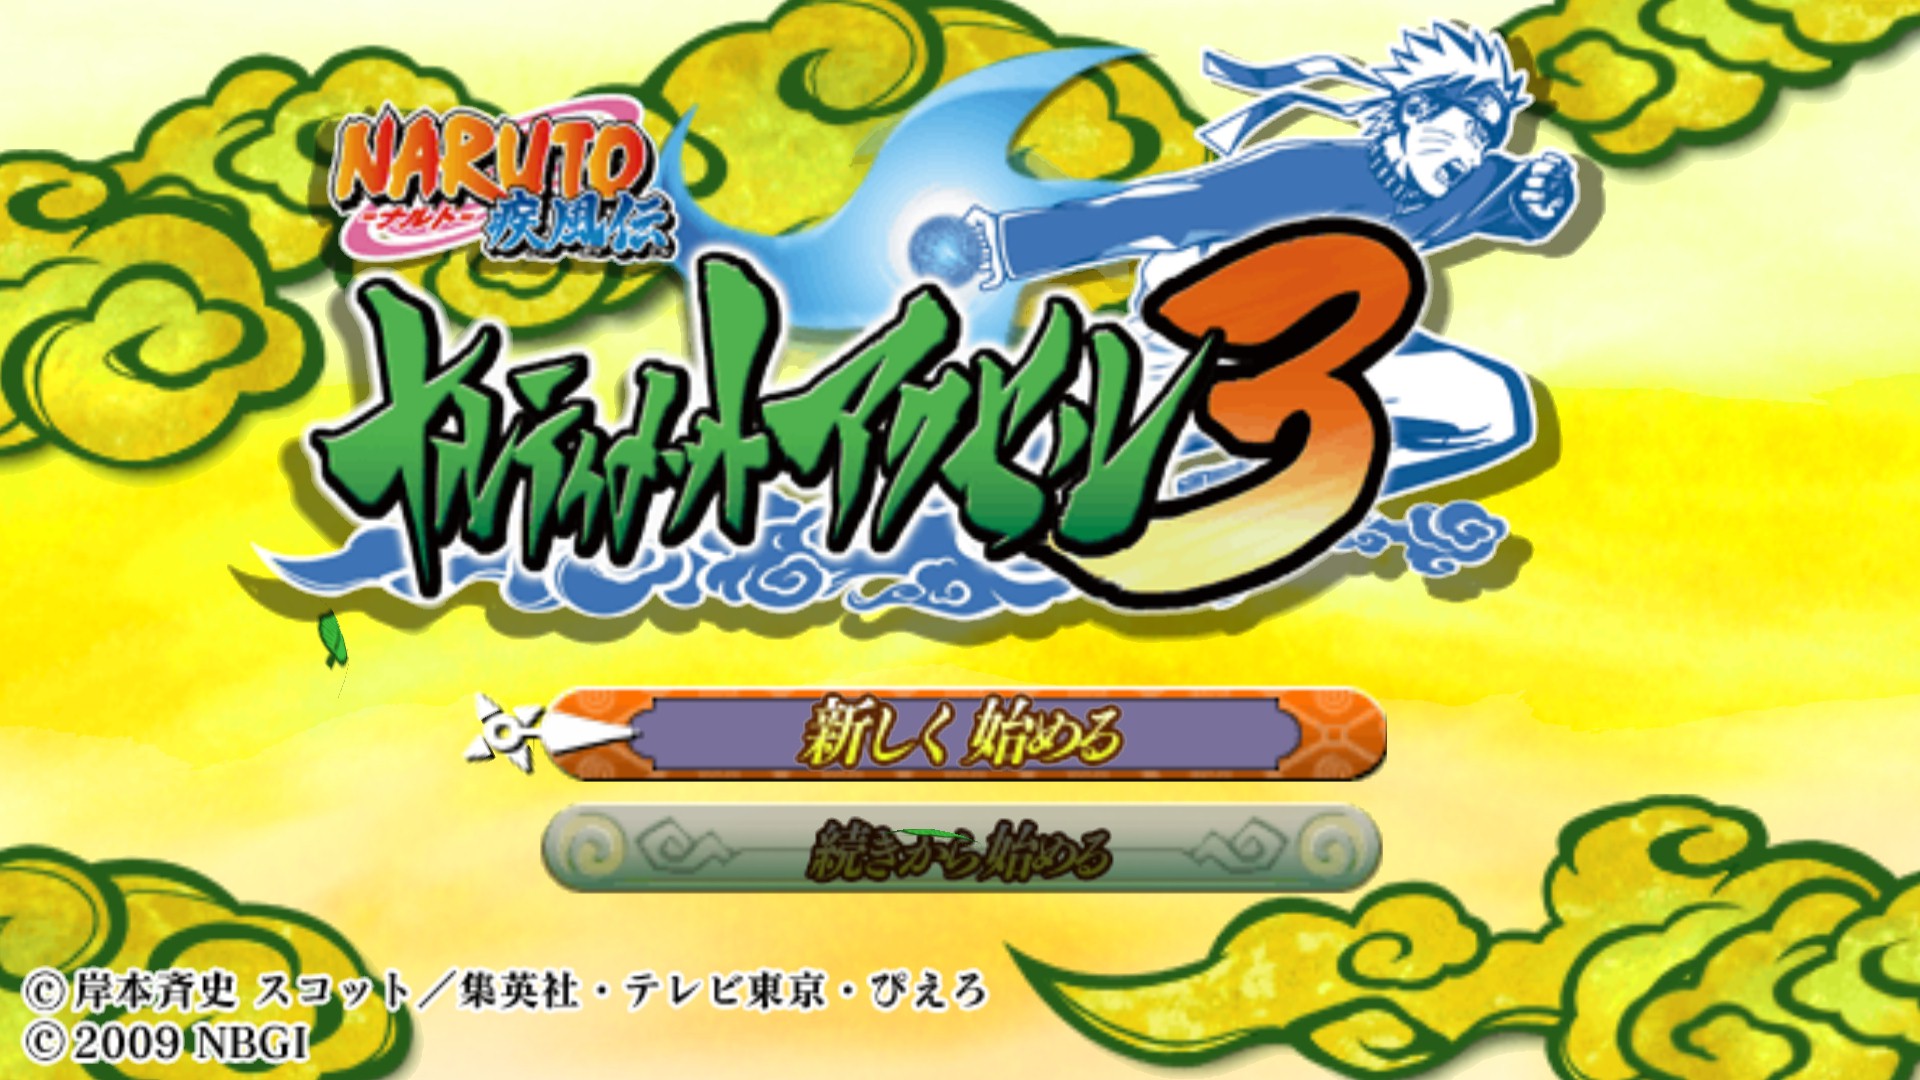 Download naruto ultimate ninja 6 ps2 iso compressed air standards 8573.1